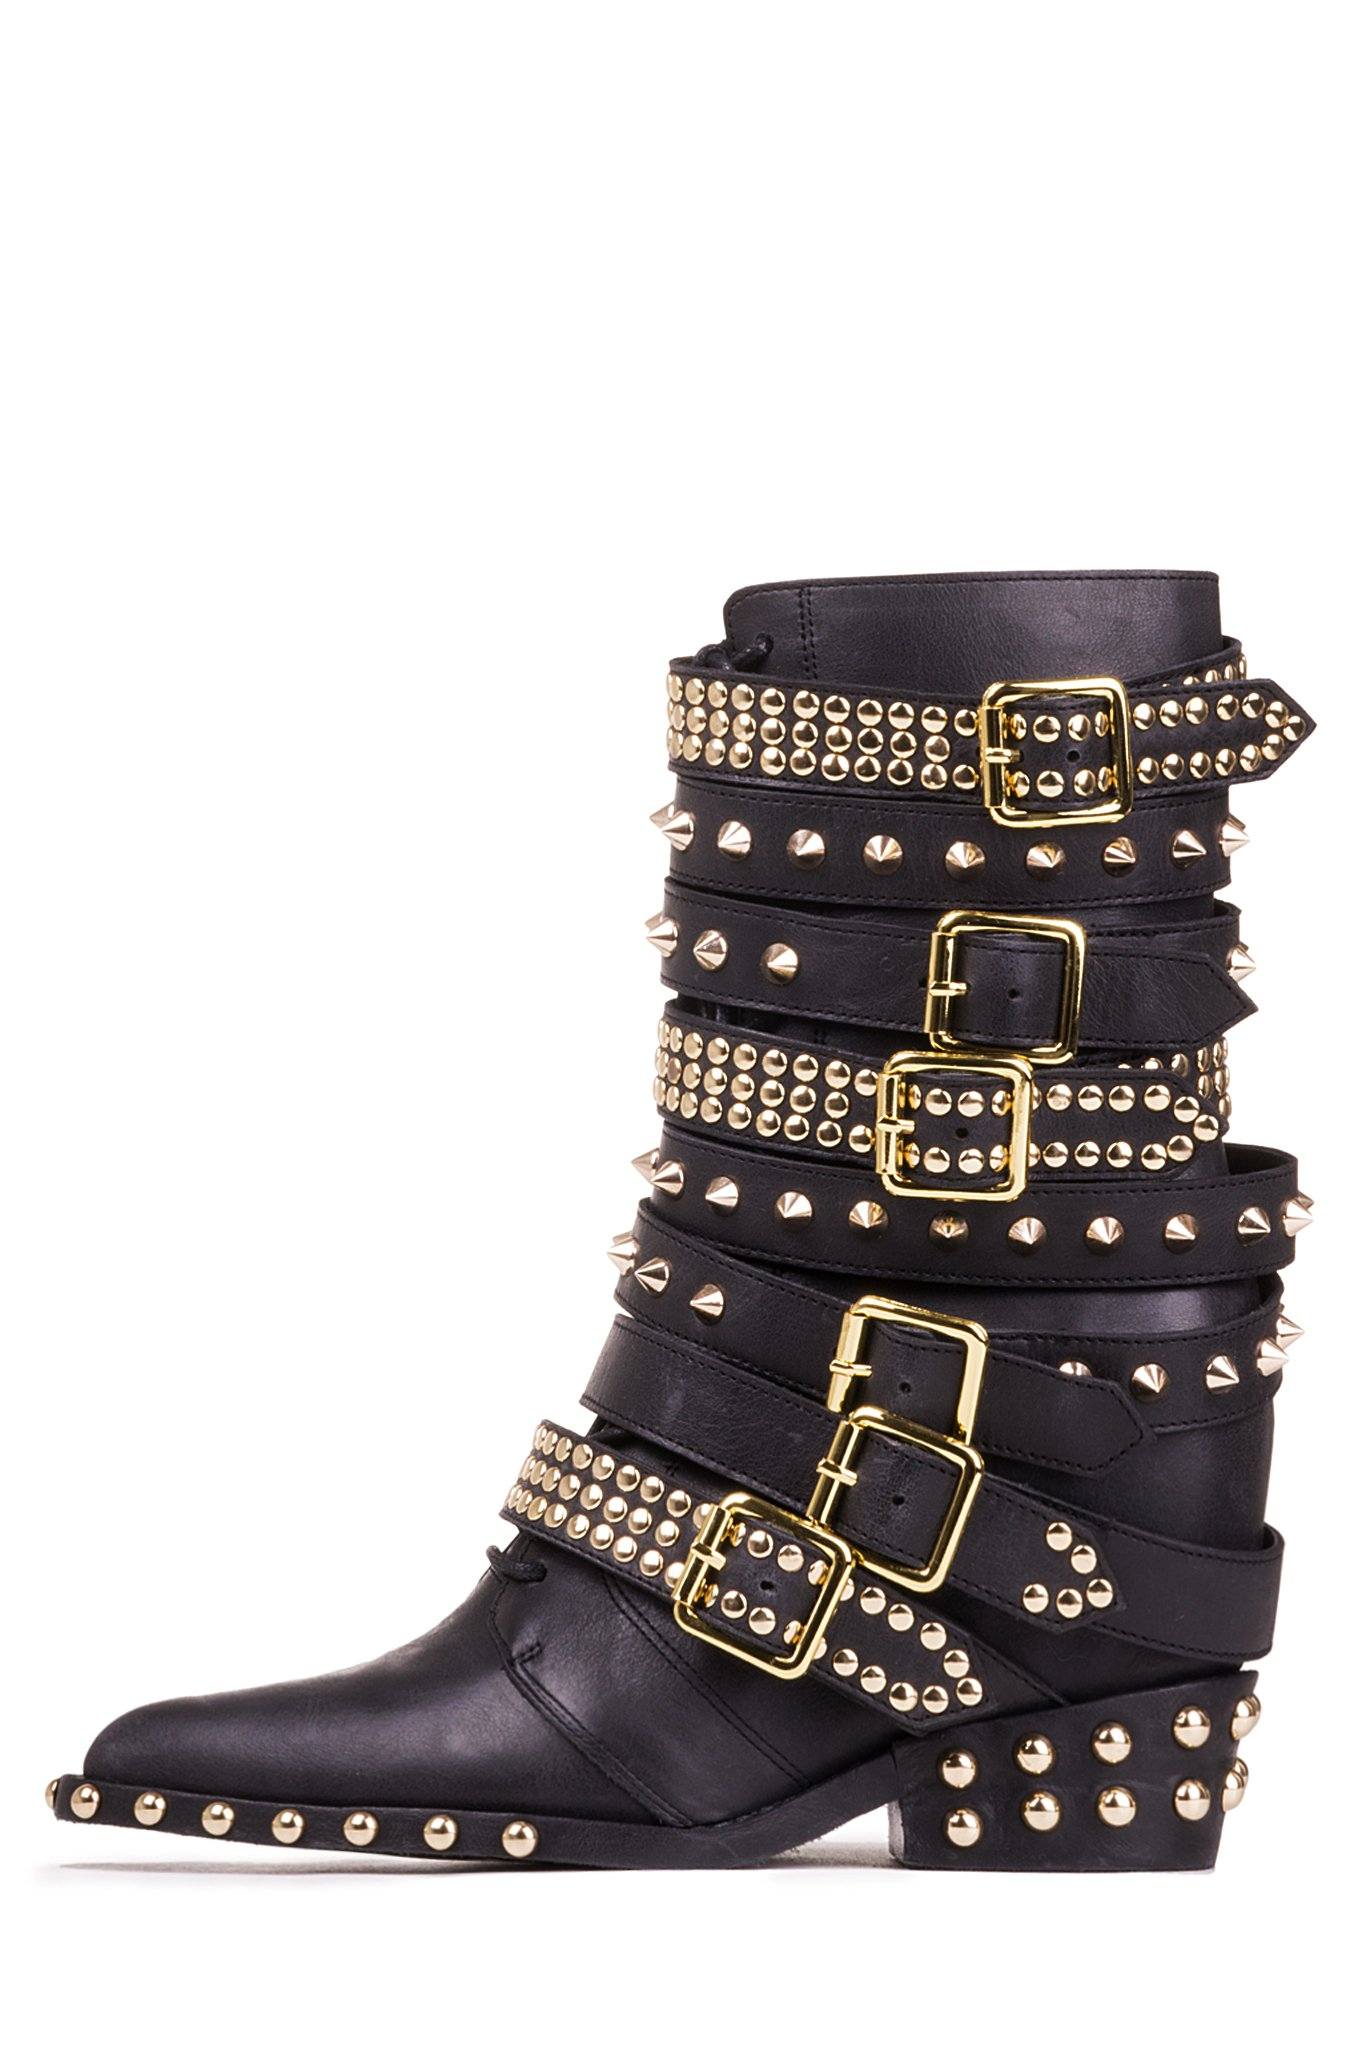 JEFFREY CAMPBELL DRACO BOOTS - GOLD